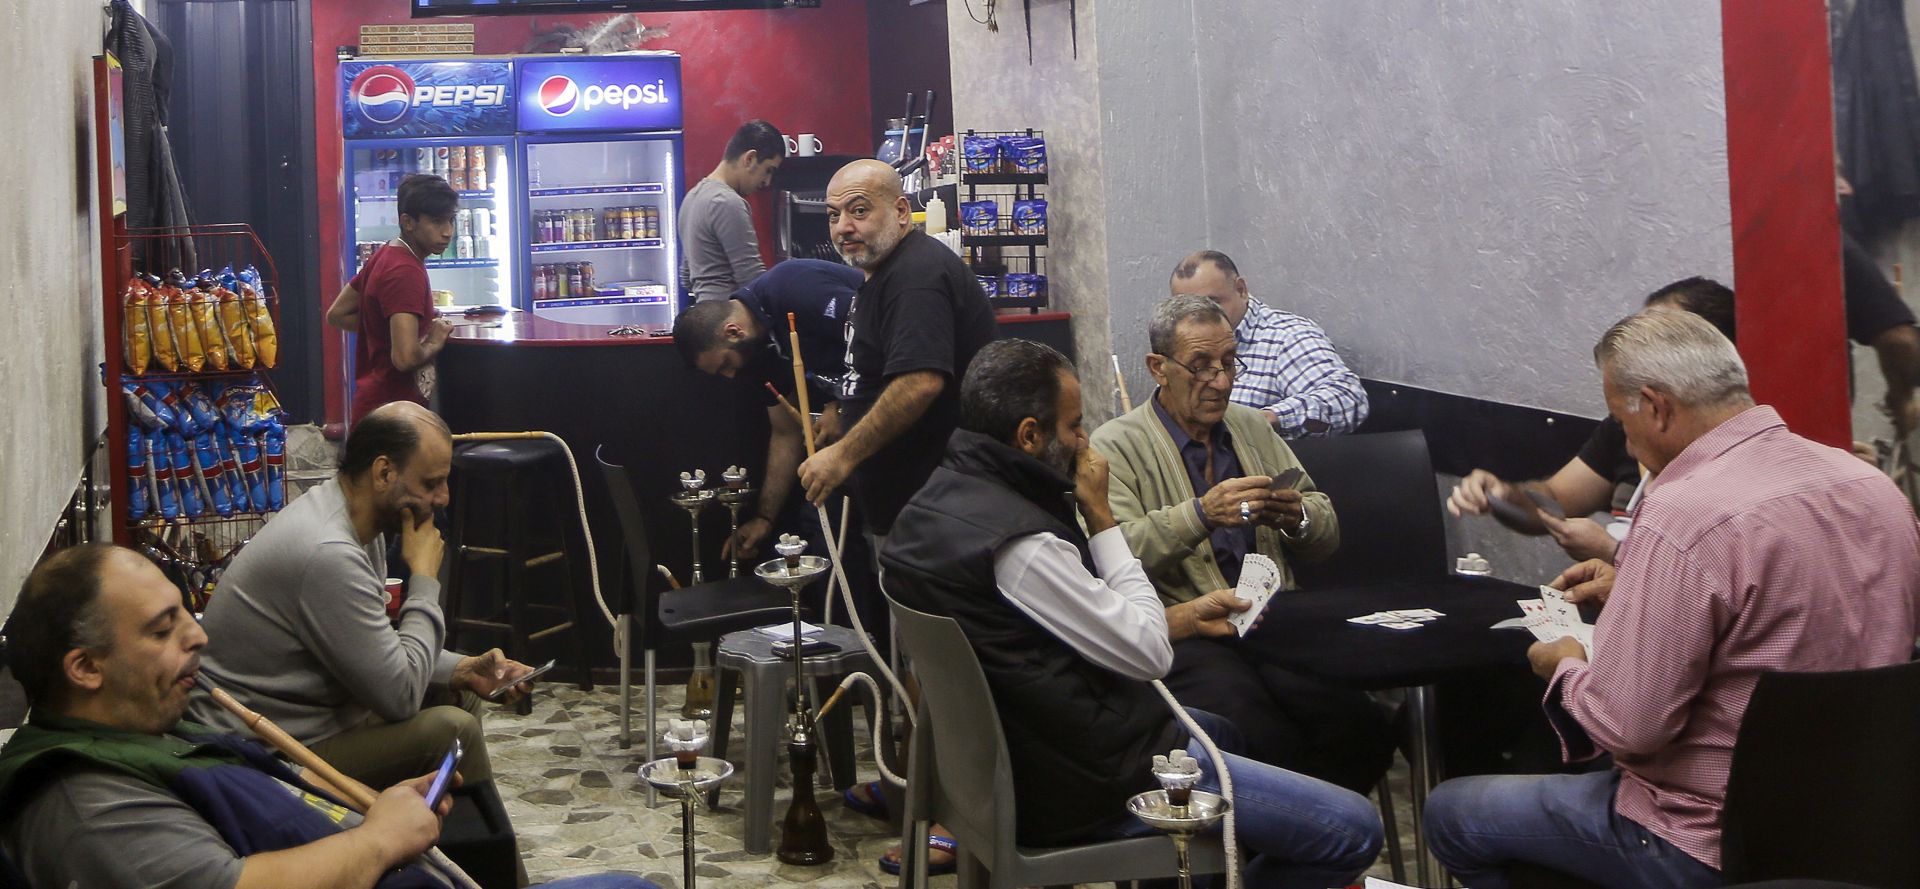 epa06310456 Lebanese men play card and smoke Shisha while listening to the speech of Hezbollah Leader Hassan Nasrallah on TV at a coffee shop in Beirut, Lebanon, 05 November 2017. Lebanese Prime Minister Saad Hariri Announced on 04 Novermber 2017 that he resigns from the Prime Minister's office. According to media reports, Hariri said that the current political climate reminds him with the time before the assassination of his father, former Lebanese Prime Minister Rafic Hariri, and he also mentioned Iran's influence in his country, and the region. Hariri came into office for his second term on 18 December 2017. Nasrallah said in a televised speech that the resignation of Saad Hariri is a decision that came from Saudi Arabia, and that its reasons are not clear to anyone in Lebanon. And he asked his supporters and all the Lebanese parties and All political currents in the country to remain calm and maintain civil peace, and added that Saudi Arabia is interfering in the affairs of Lebanon and is working to undermine its civil peace.  EPA/NABIL MOUNZER